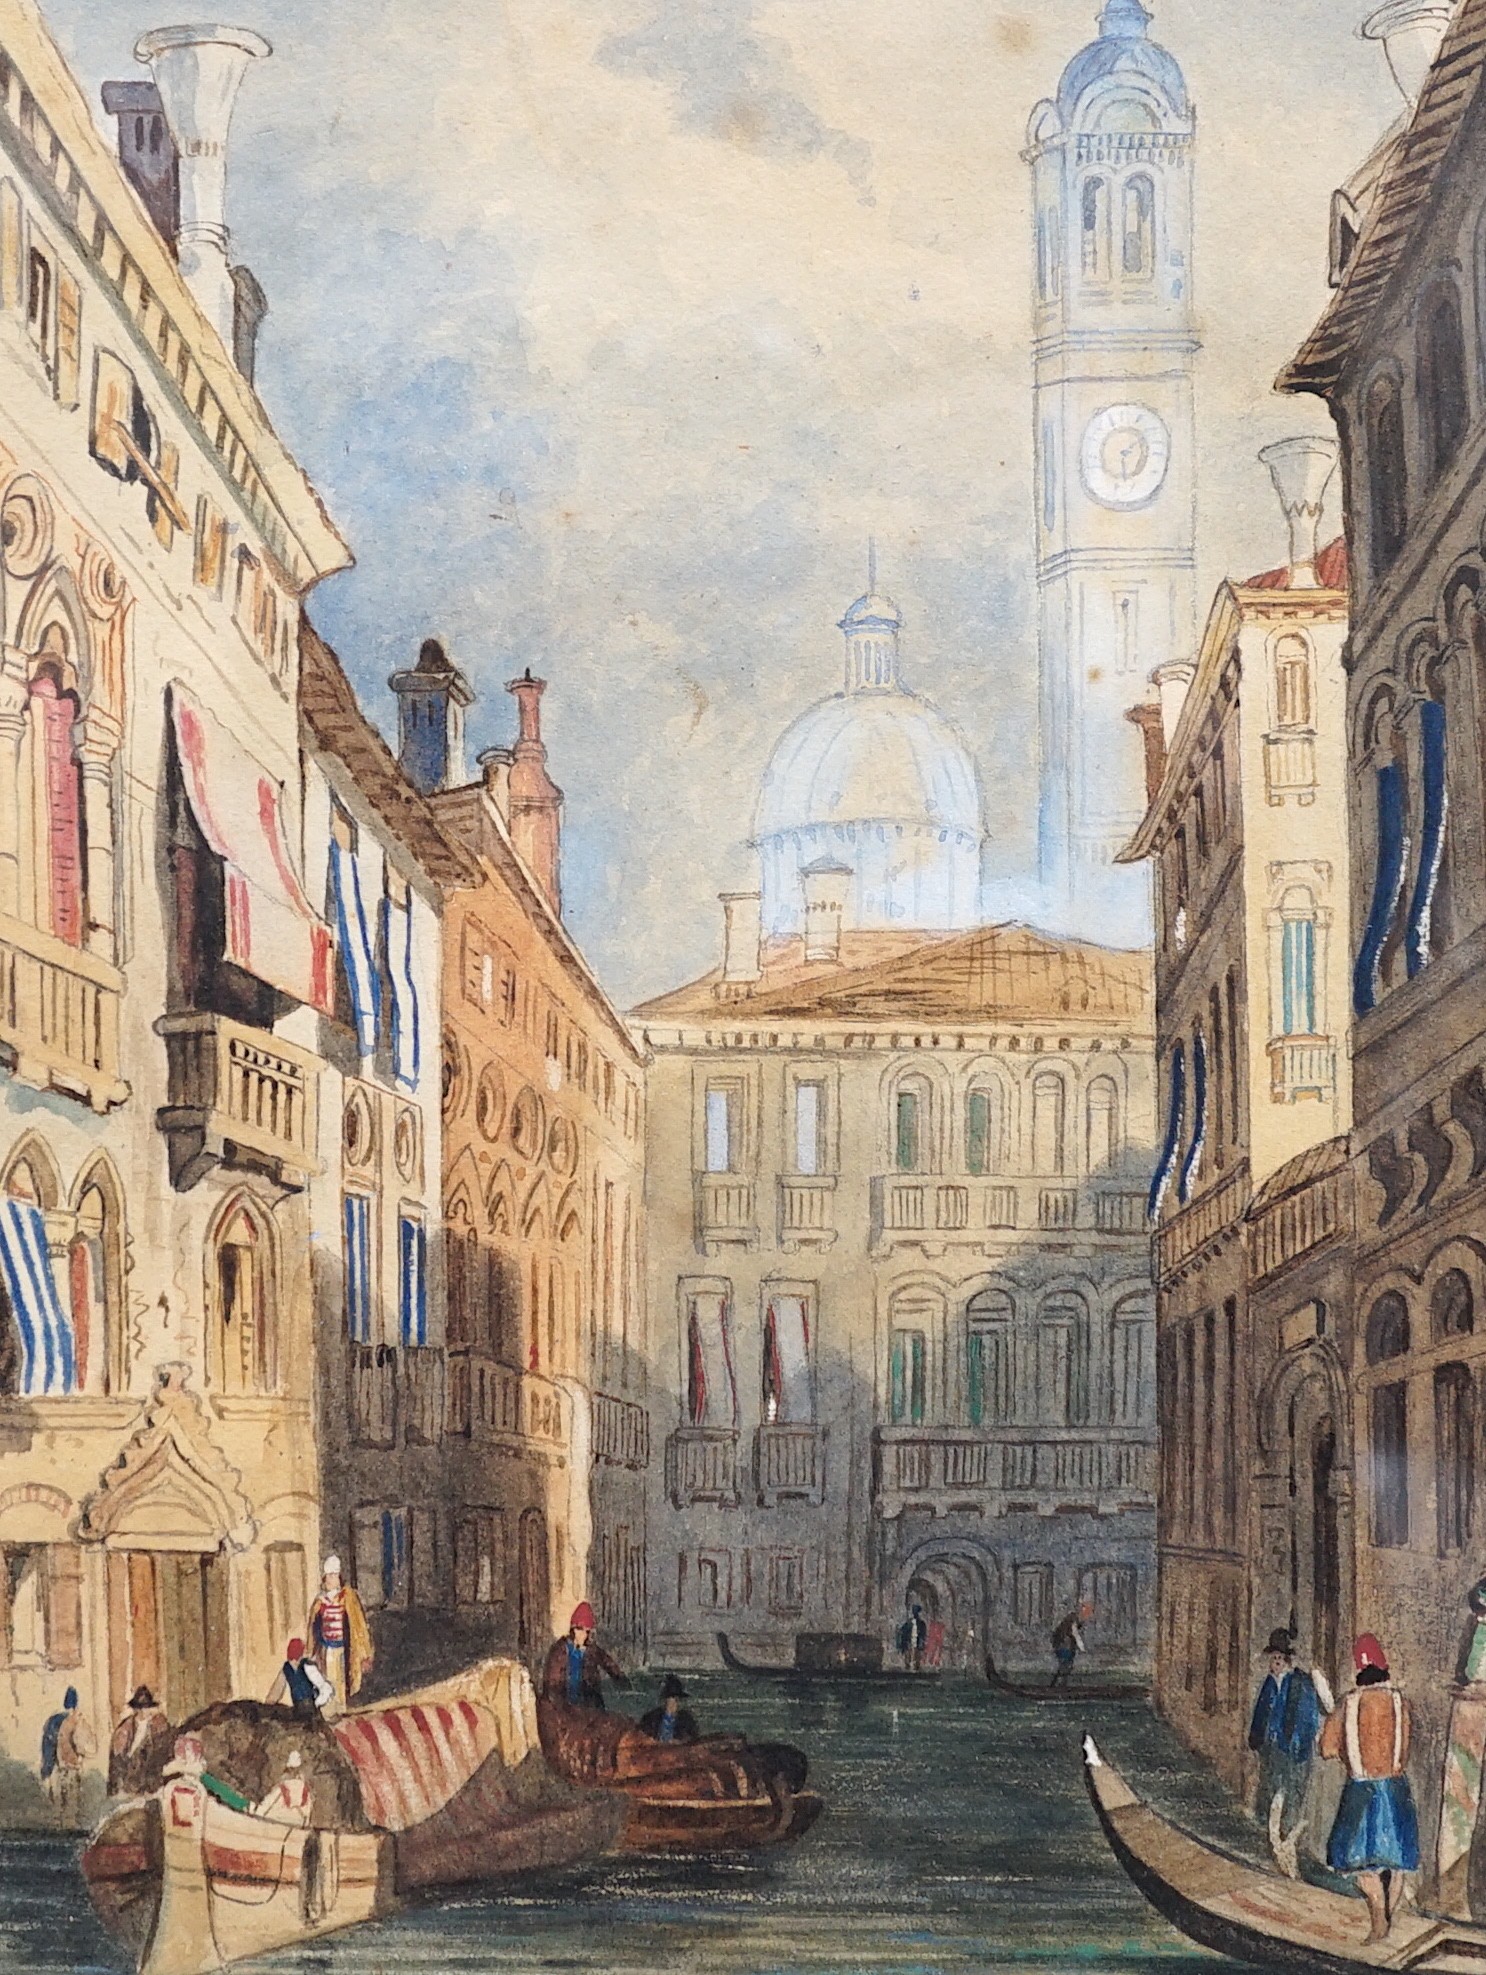 After Samuel Prout, two watercolours, Venetian canal scene and Charles Bridge, Prague, one initialled TF and dated '59, 26 x 19cm and 28 x 21cm